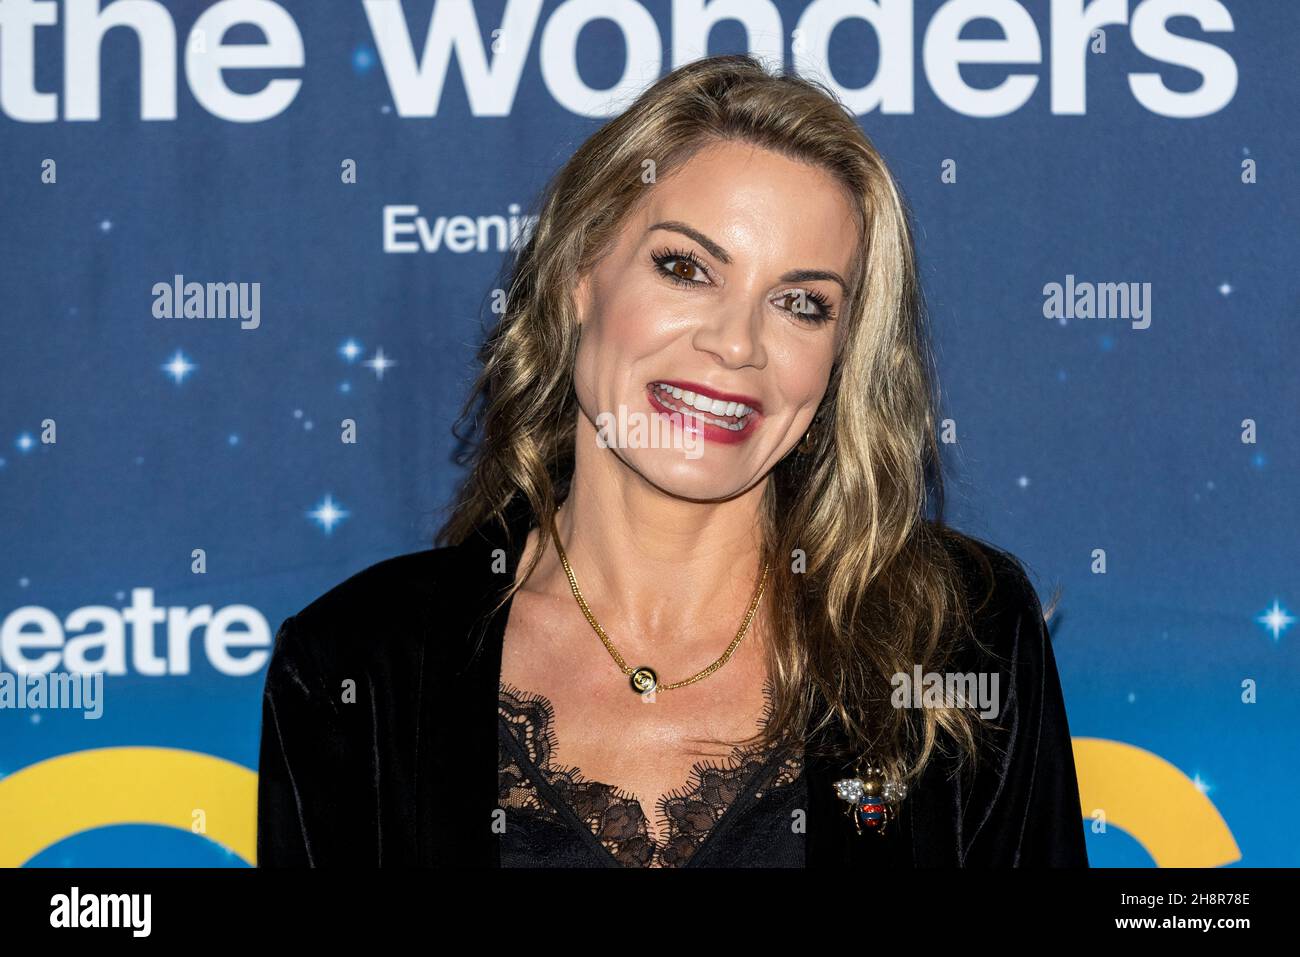 London, UK.  1 December 2021. Charlotte Jackson Coleman, TV presenter, arrives for the media night for the National Theatre and Trafalgar Theatre Production's tour of “The Curious Incident of the Dog in the Night-Time” at Troubadour Wembley Park Theatre. Credit: Stephen Chung / Alamy Live News Stock Photo